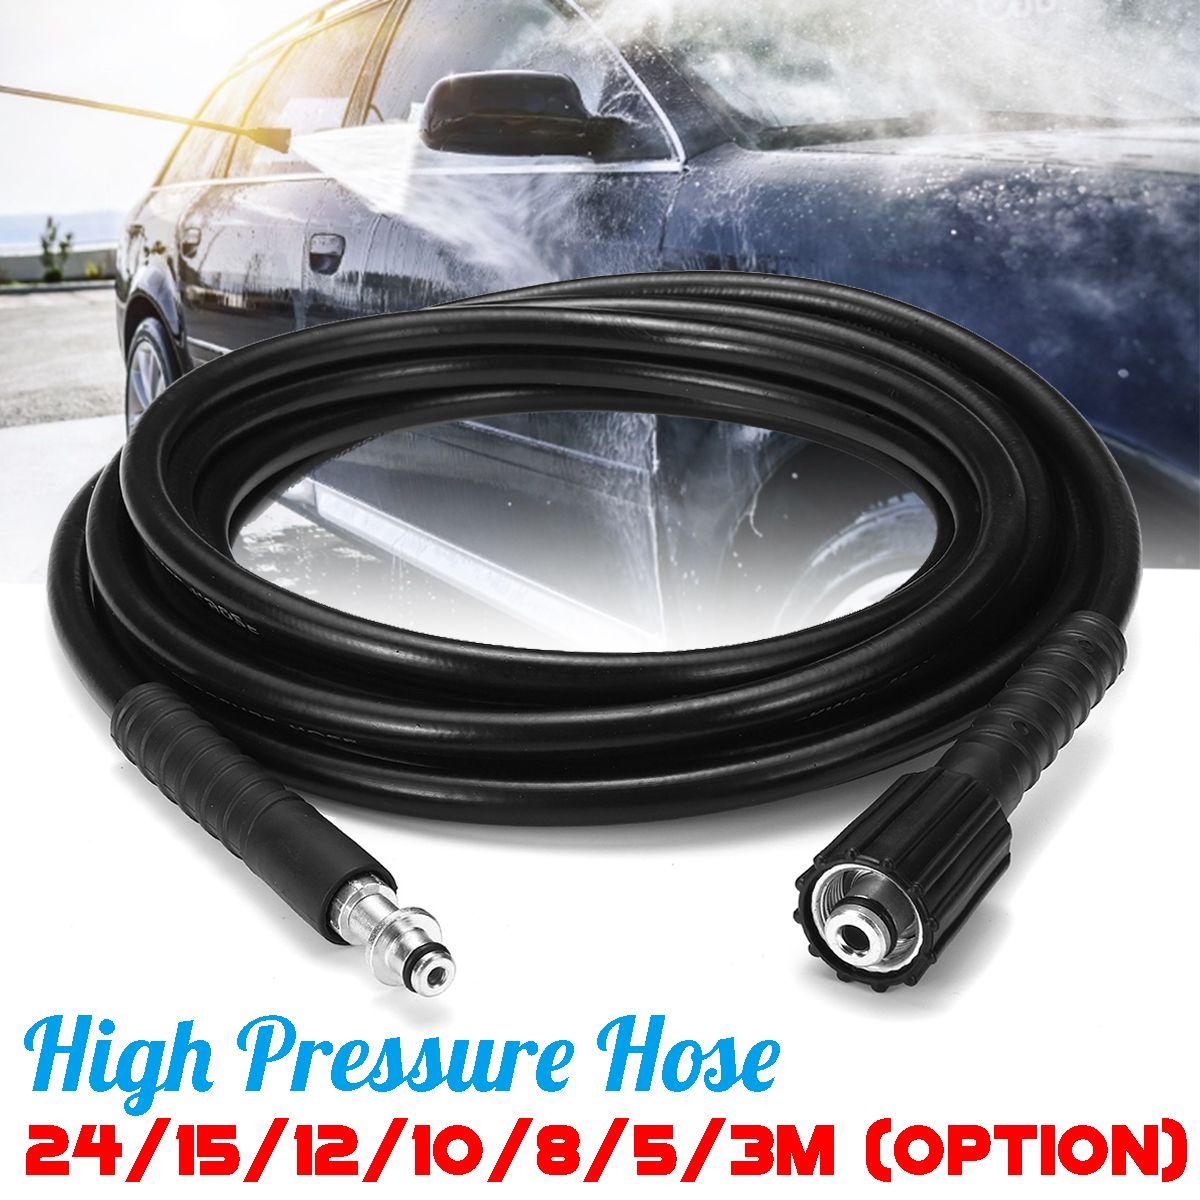 3-24M-High-Pressure-Washer-Drain-Cleaning-Hose-Pipe-Cleaner-For-Karcher-K2-K3-K5-1455881